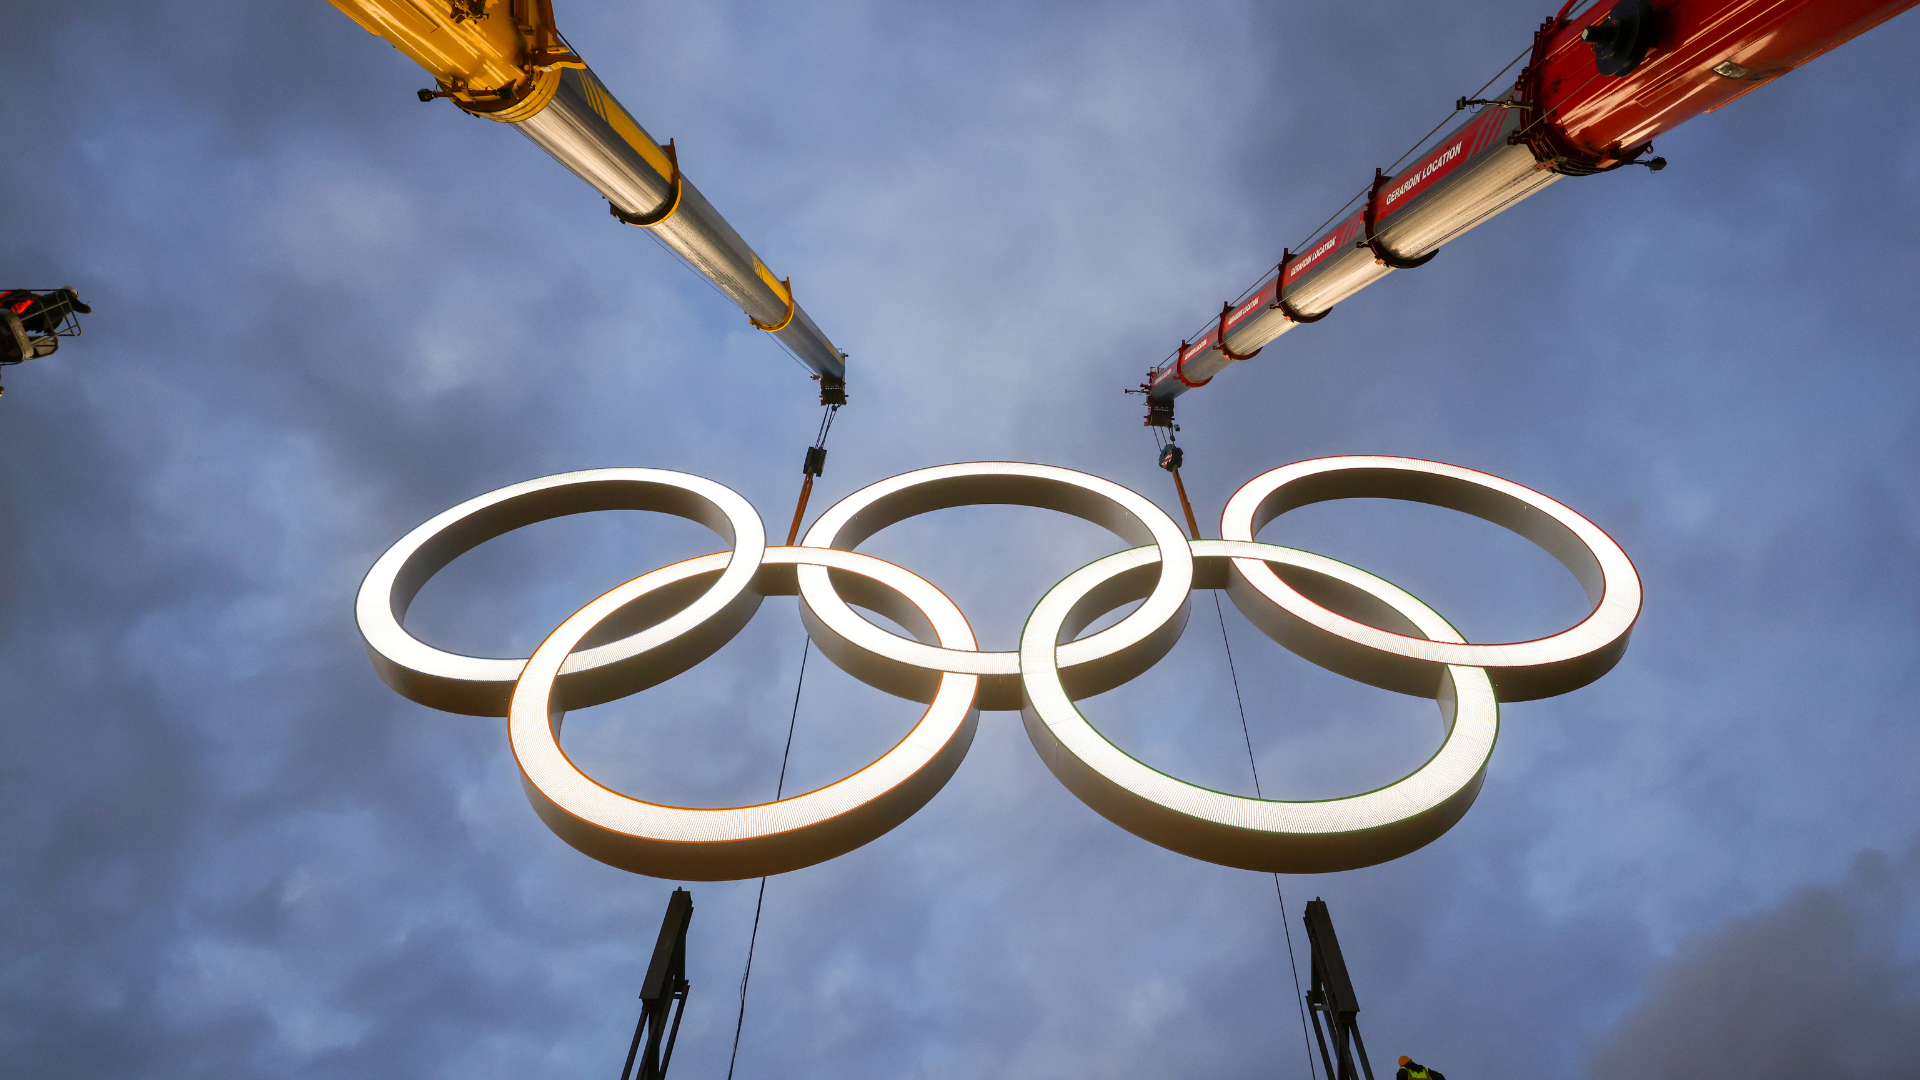 The Olympic rings will be lit up by night on the Eiffel Tower. ArcelorMittal